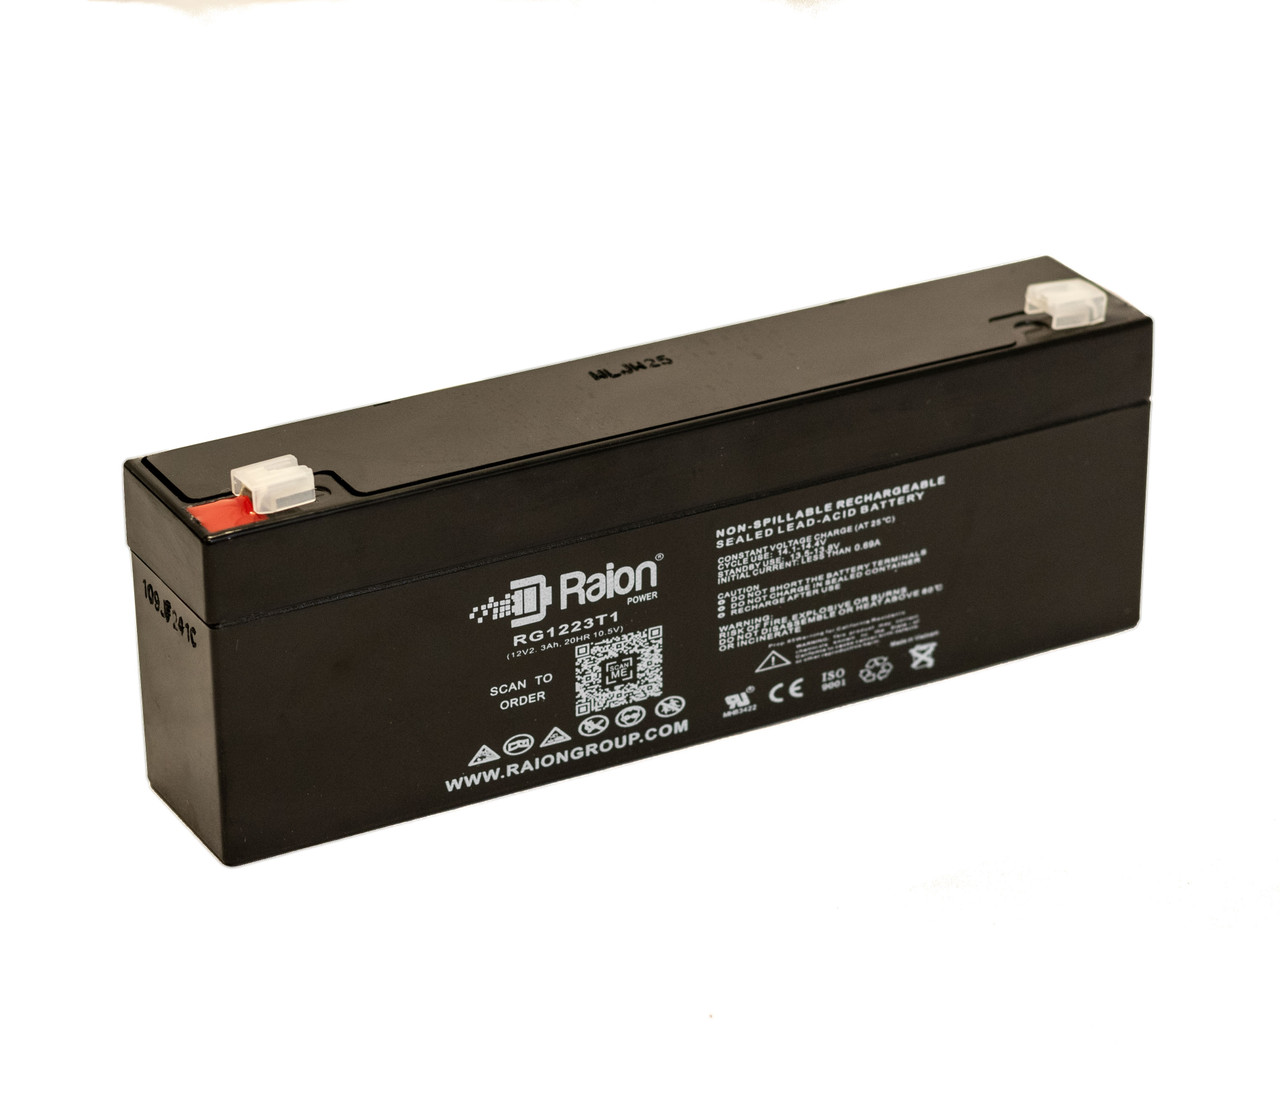 Raion Power RG1223T1 Replacement Battery for Armstrong Medical 2014